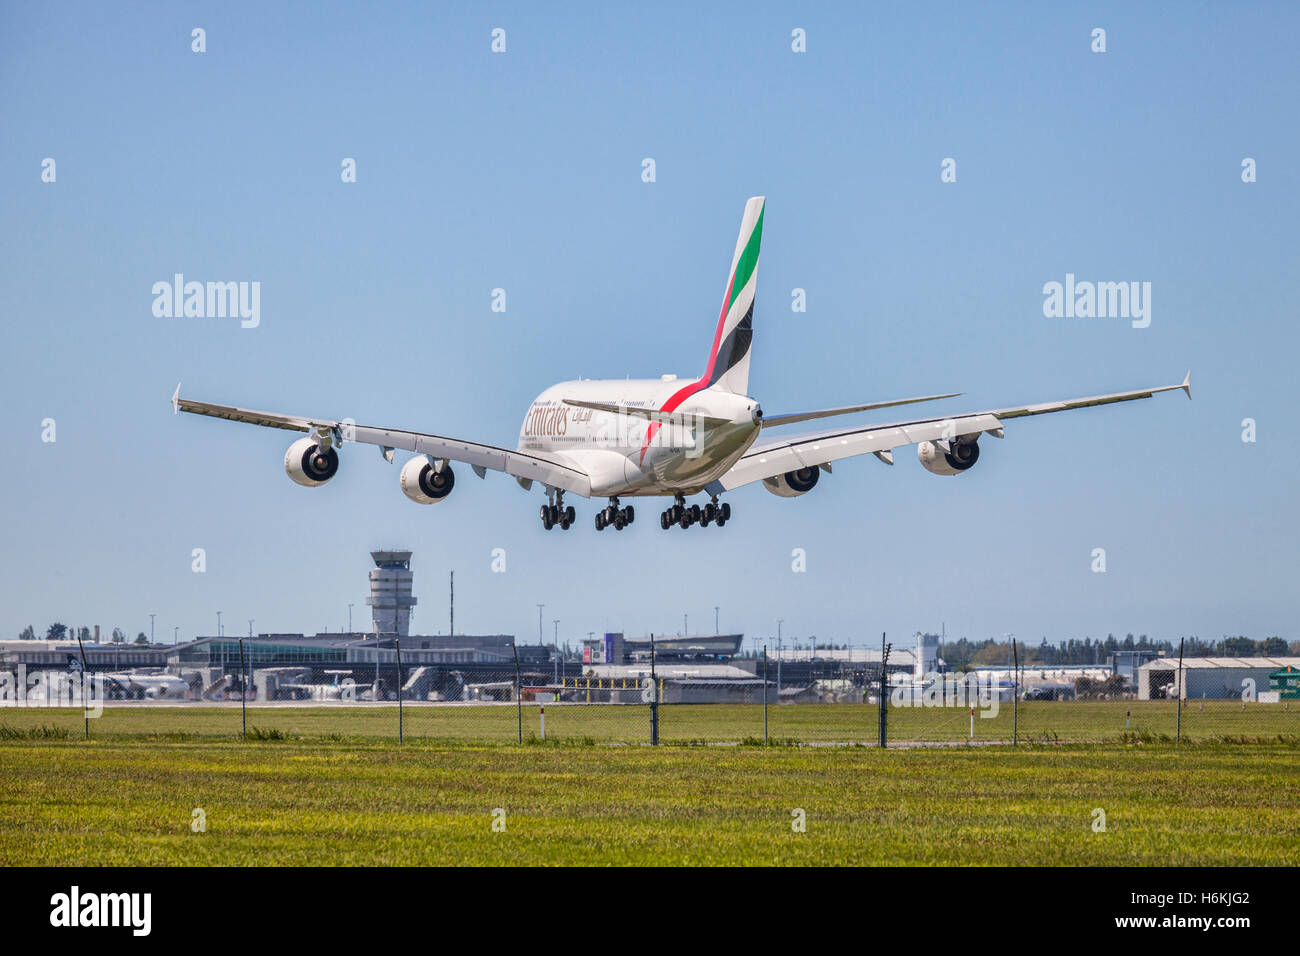 Christchurch, New Zealand. 31 October 2016. The first Airbus A380 to land at Christchurch International Airport, inaugurating a service by Emirates from Dubai via Sydney. The arrival was watched by crowds from the airport perimeter roads. Stock Photo